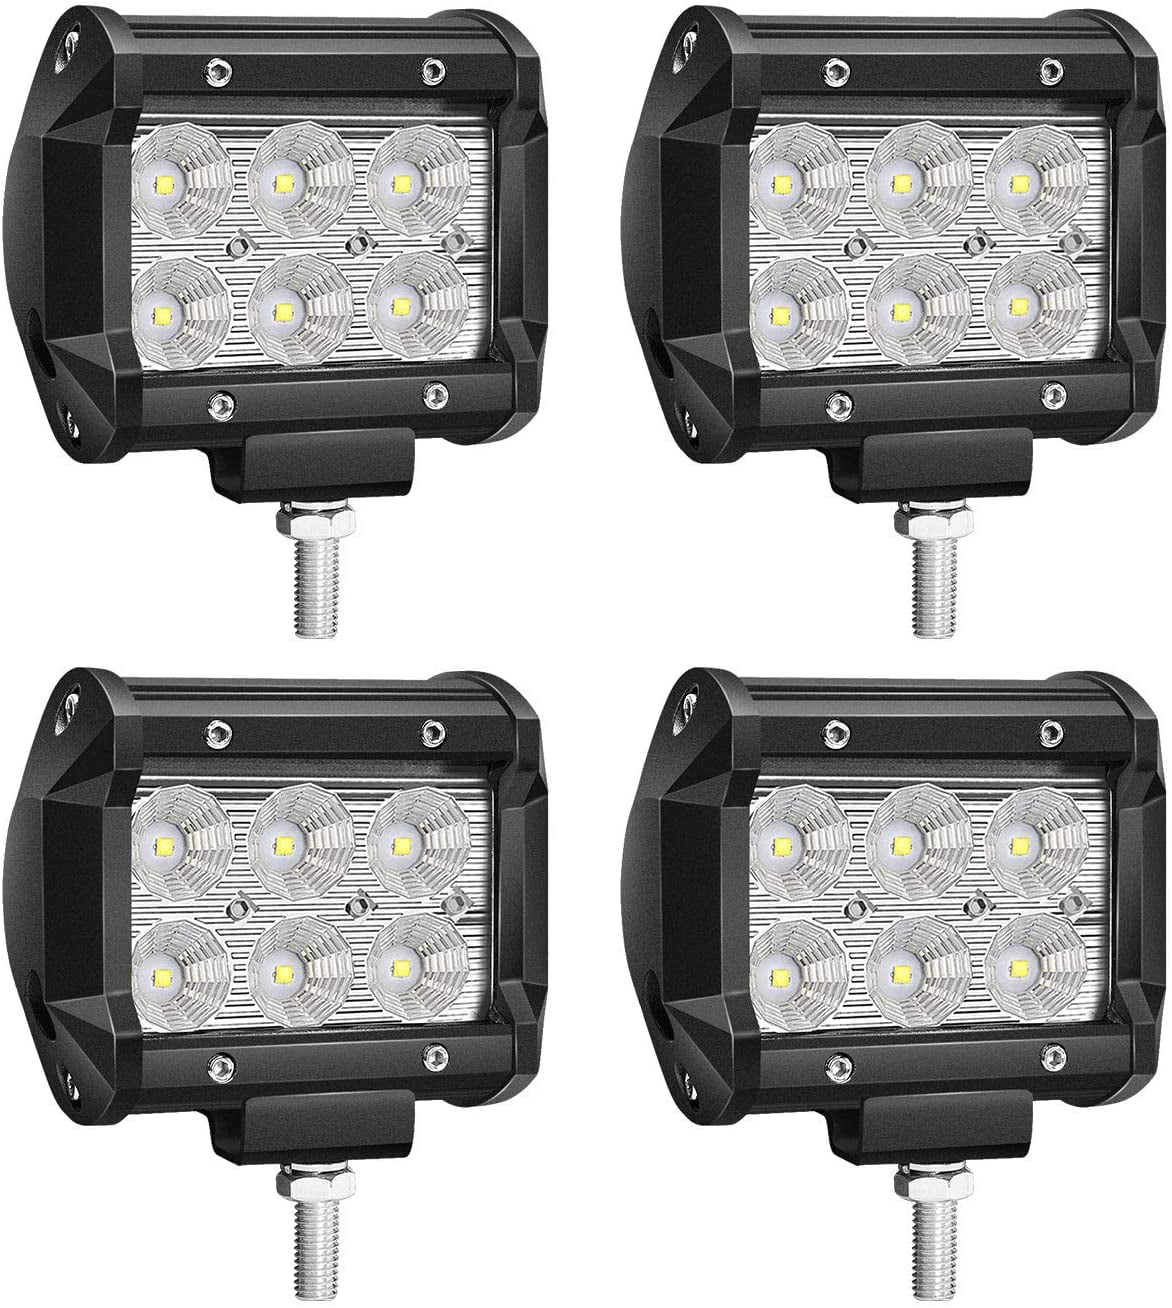 4X 3inch 18W CREE LED Work Light Spot Cube Pods Offroad Boat Ford Lamp US 